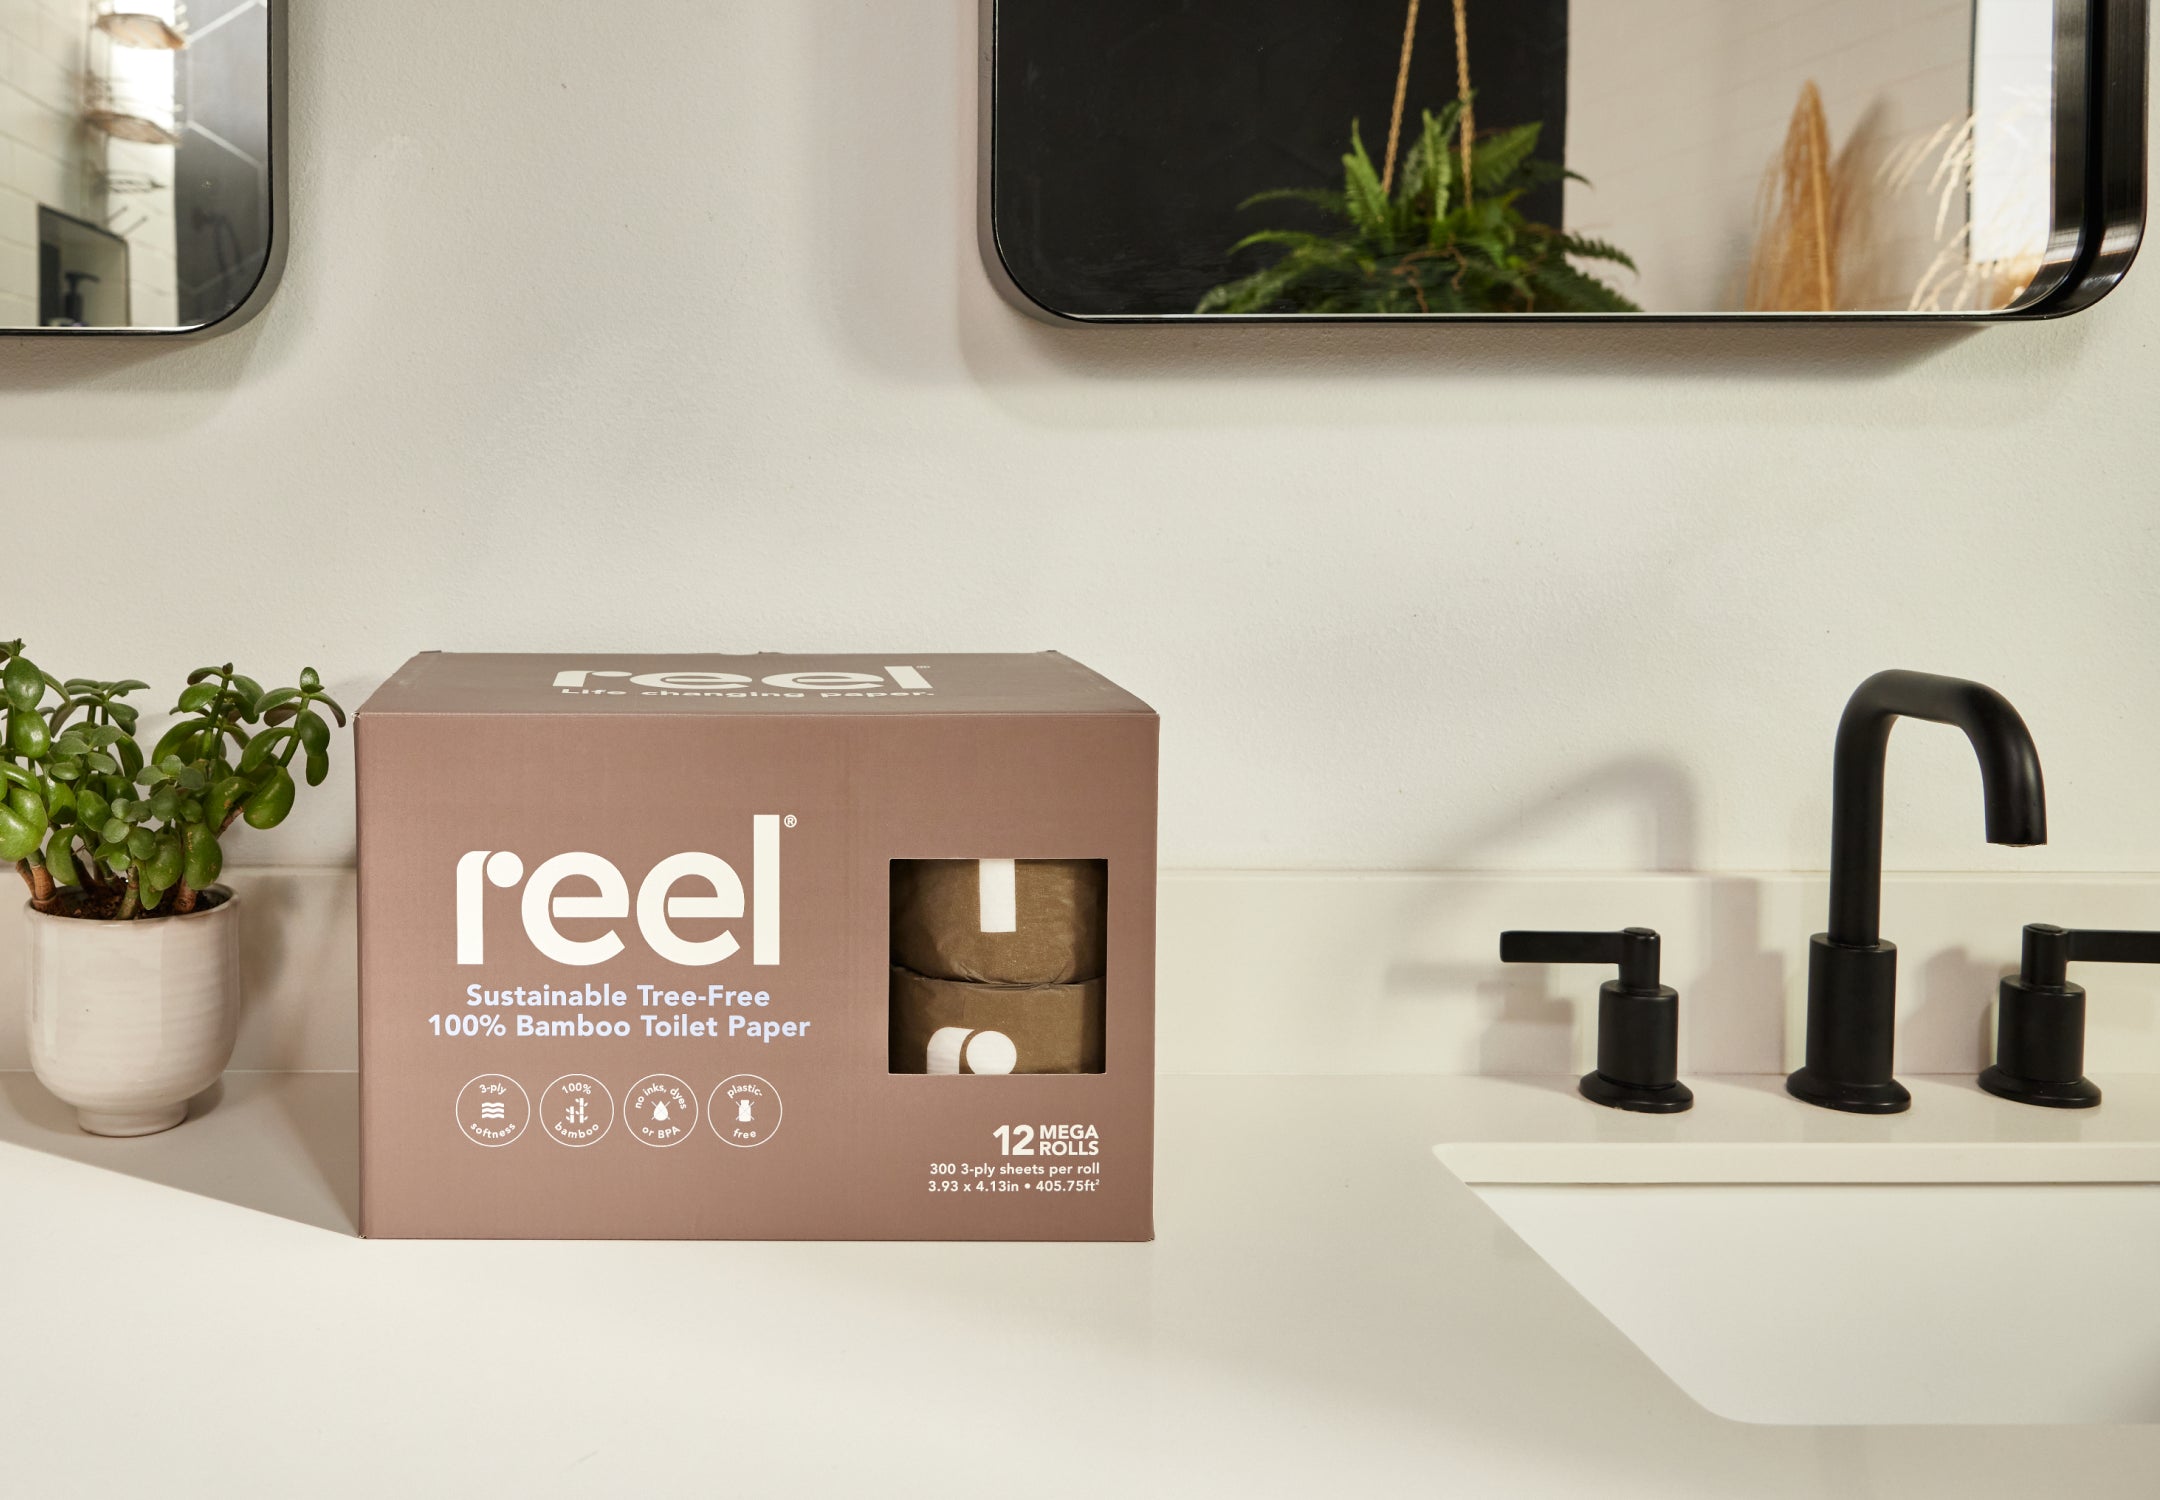 A box of Reel toilet paper sitting on a bathroom counter 